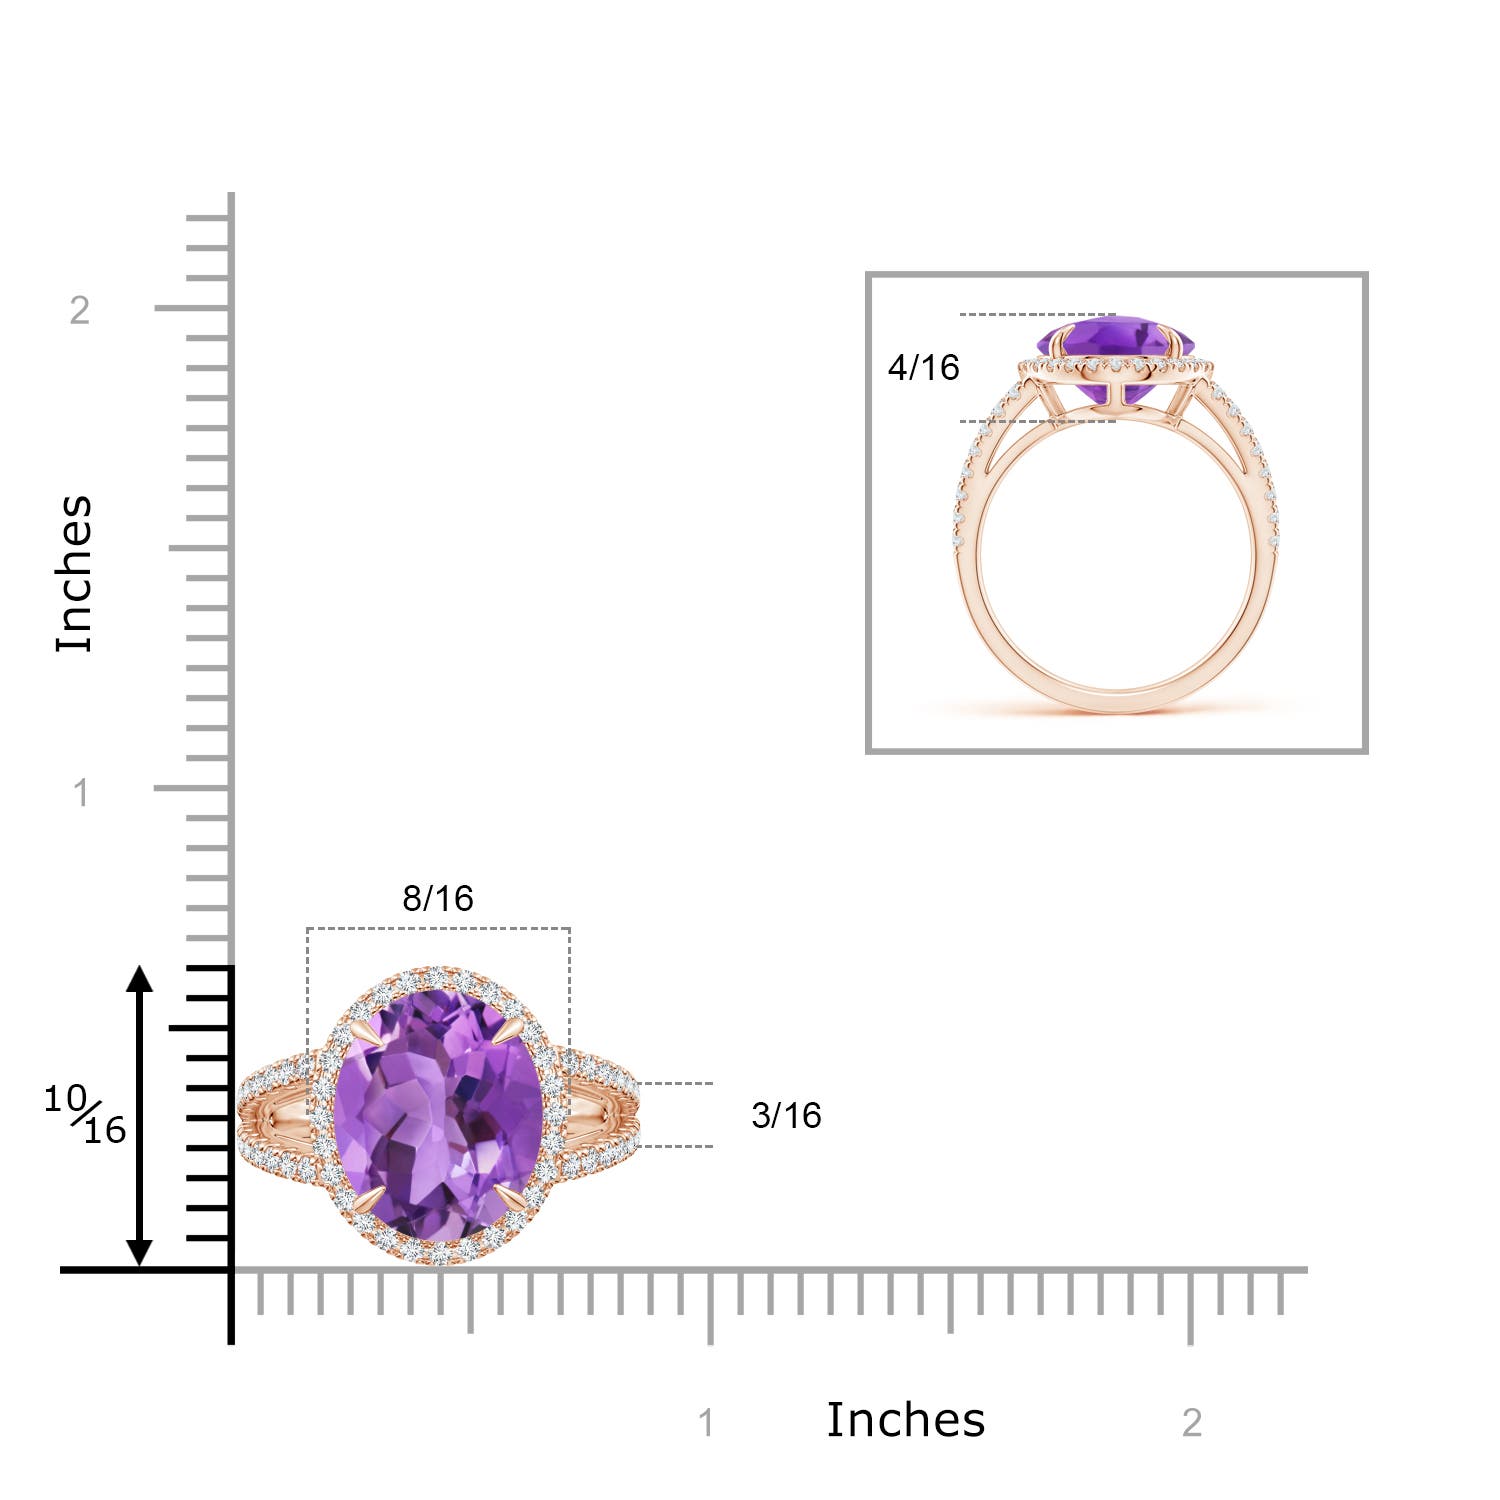 AA - Amethyst / 4.84 CT / 14 KT Rose Gold